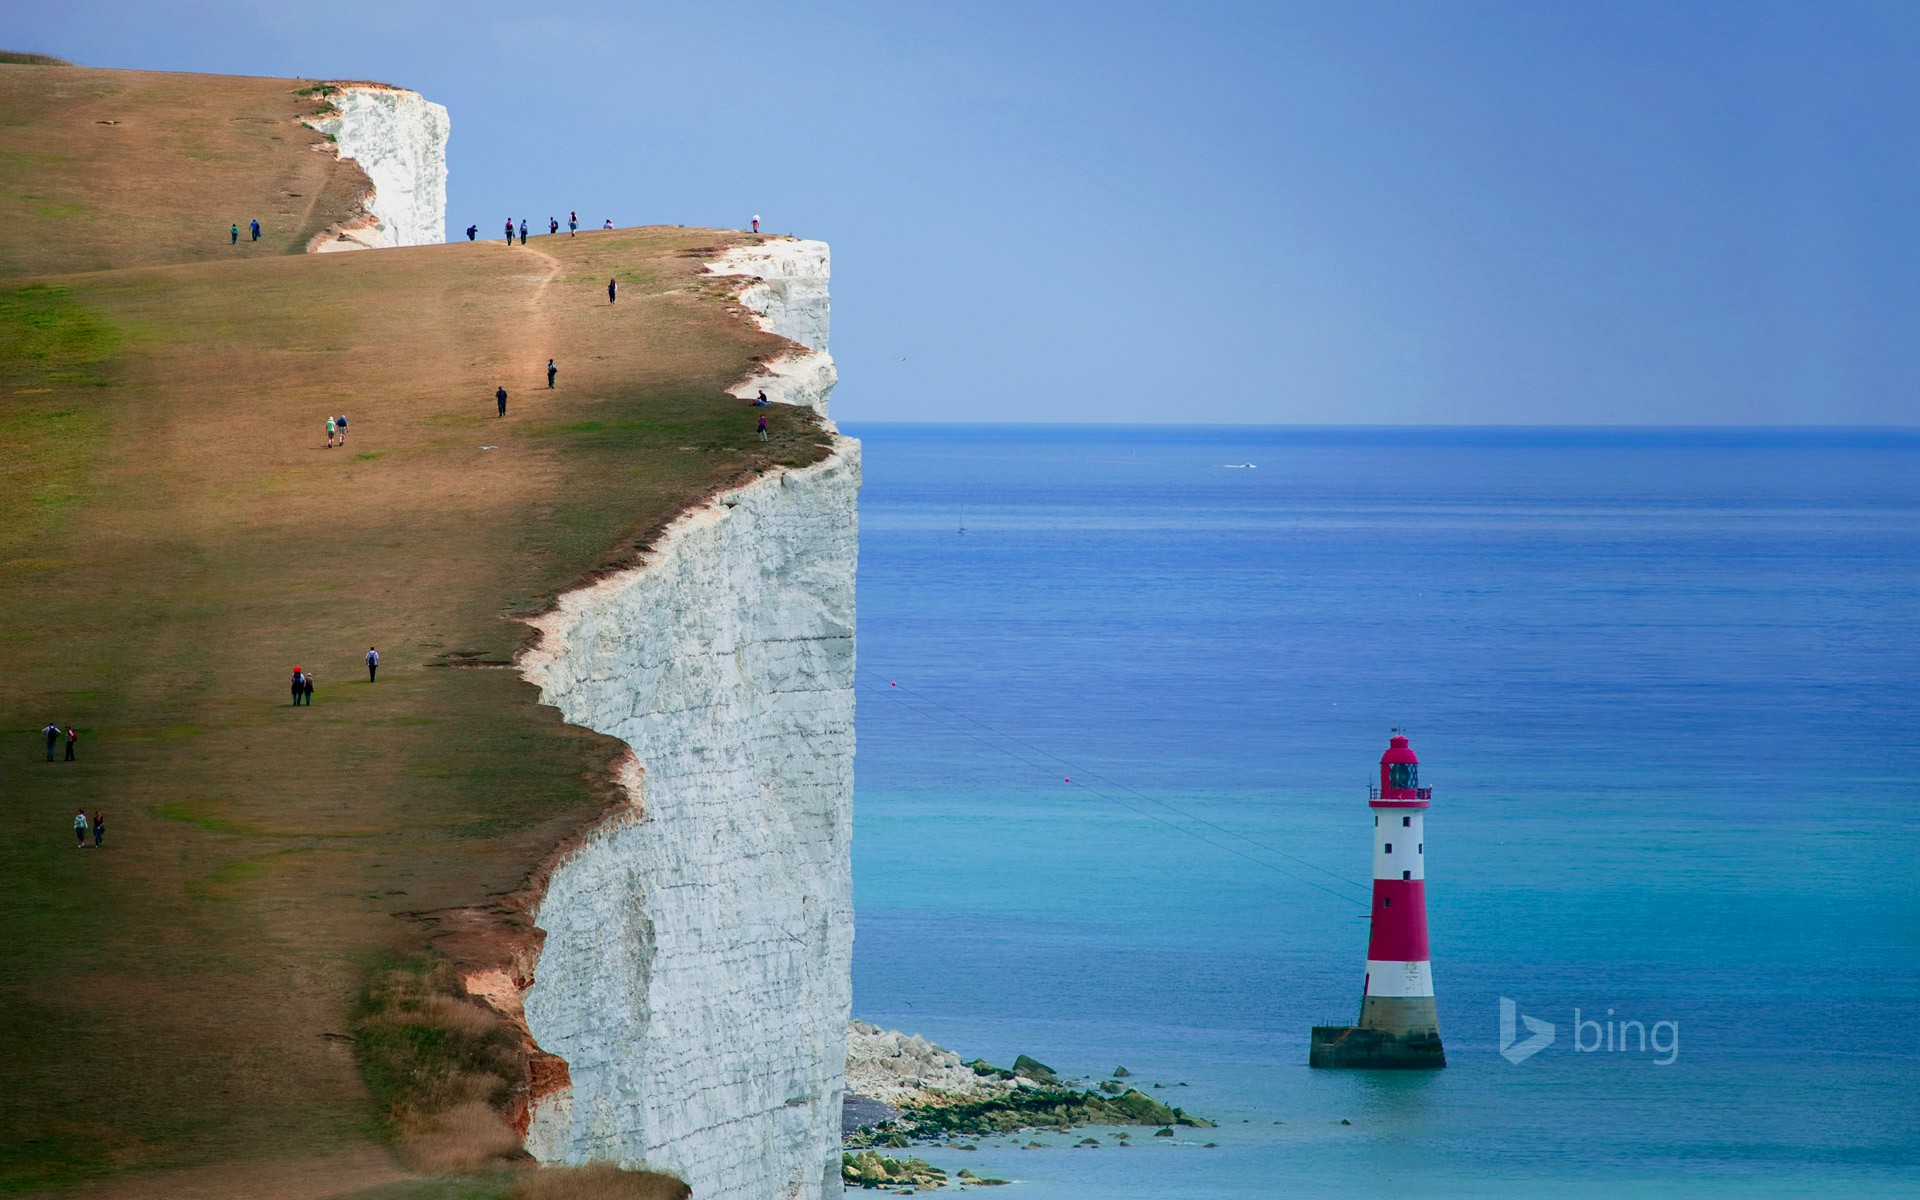 General 1920x1200 nature landscape cliff England Seven Sisters coast sea UK watermarked Cliffs of Dover Bing logo lighthouse people field